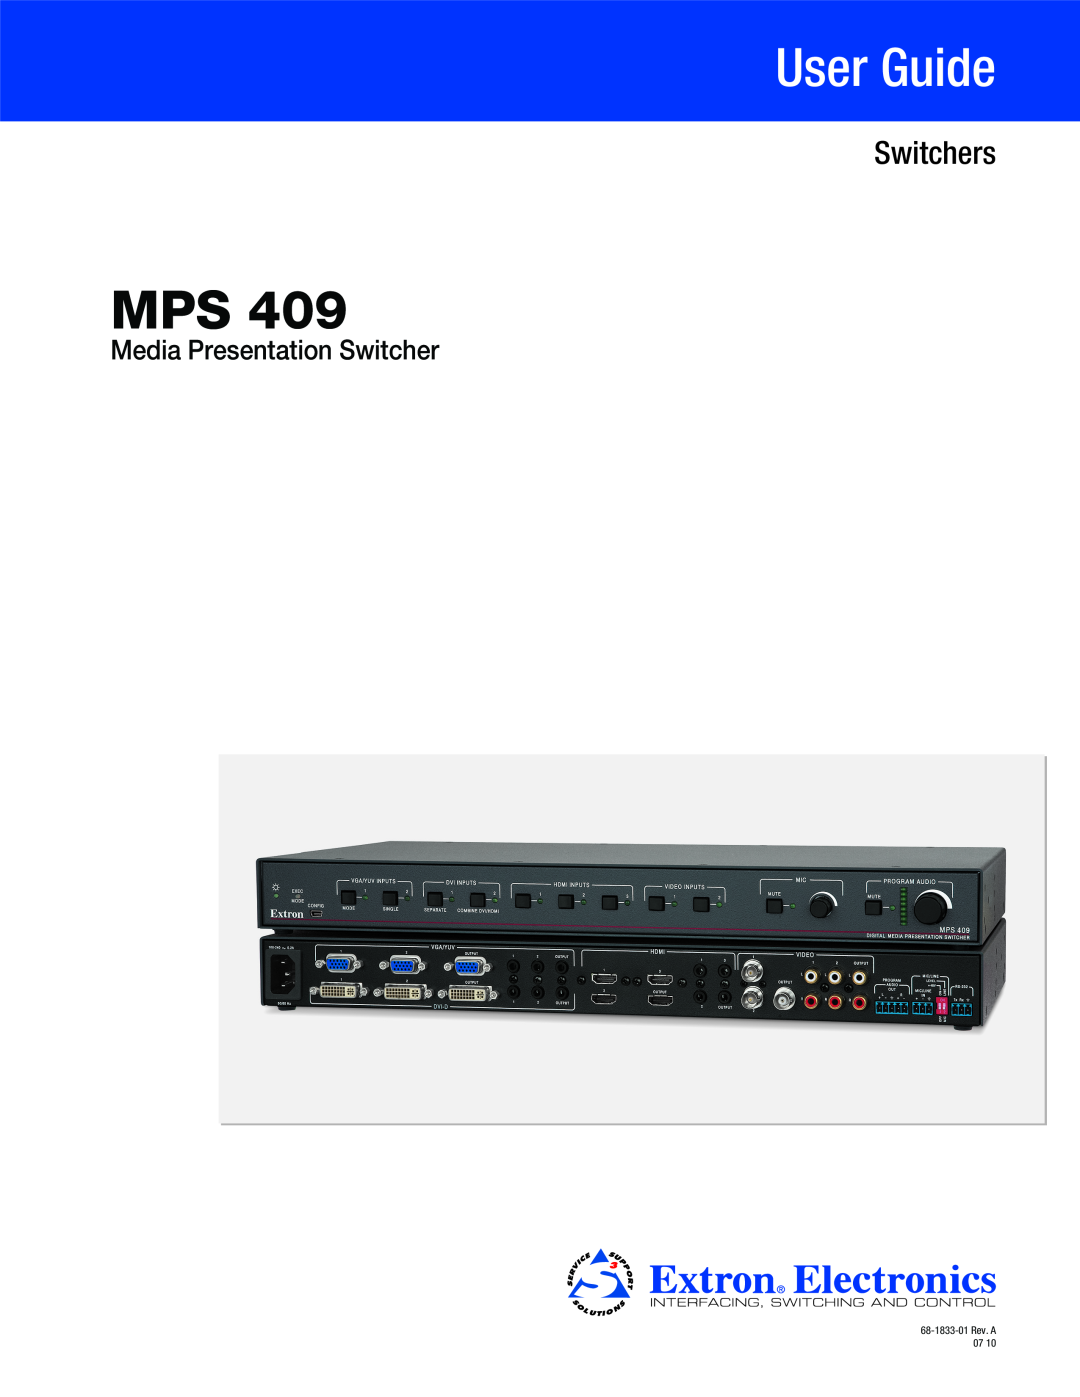 Extron electronic MPS 409 manual User Guide, Switchers, Media Presentation Switcher, 68-1833-01 Rev. A 